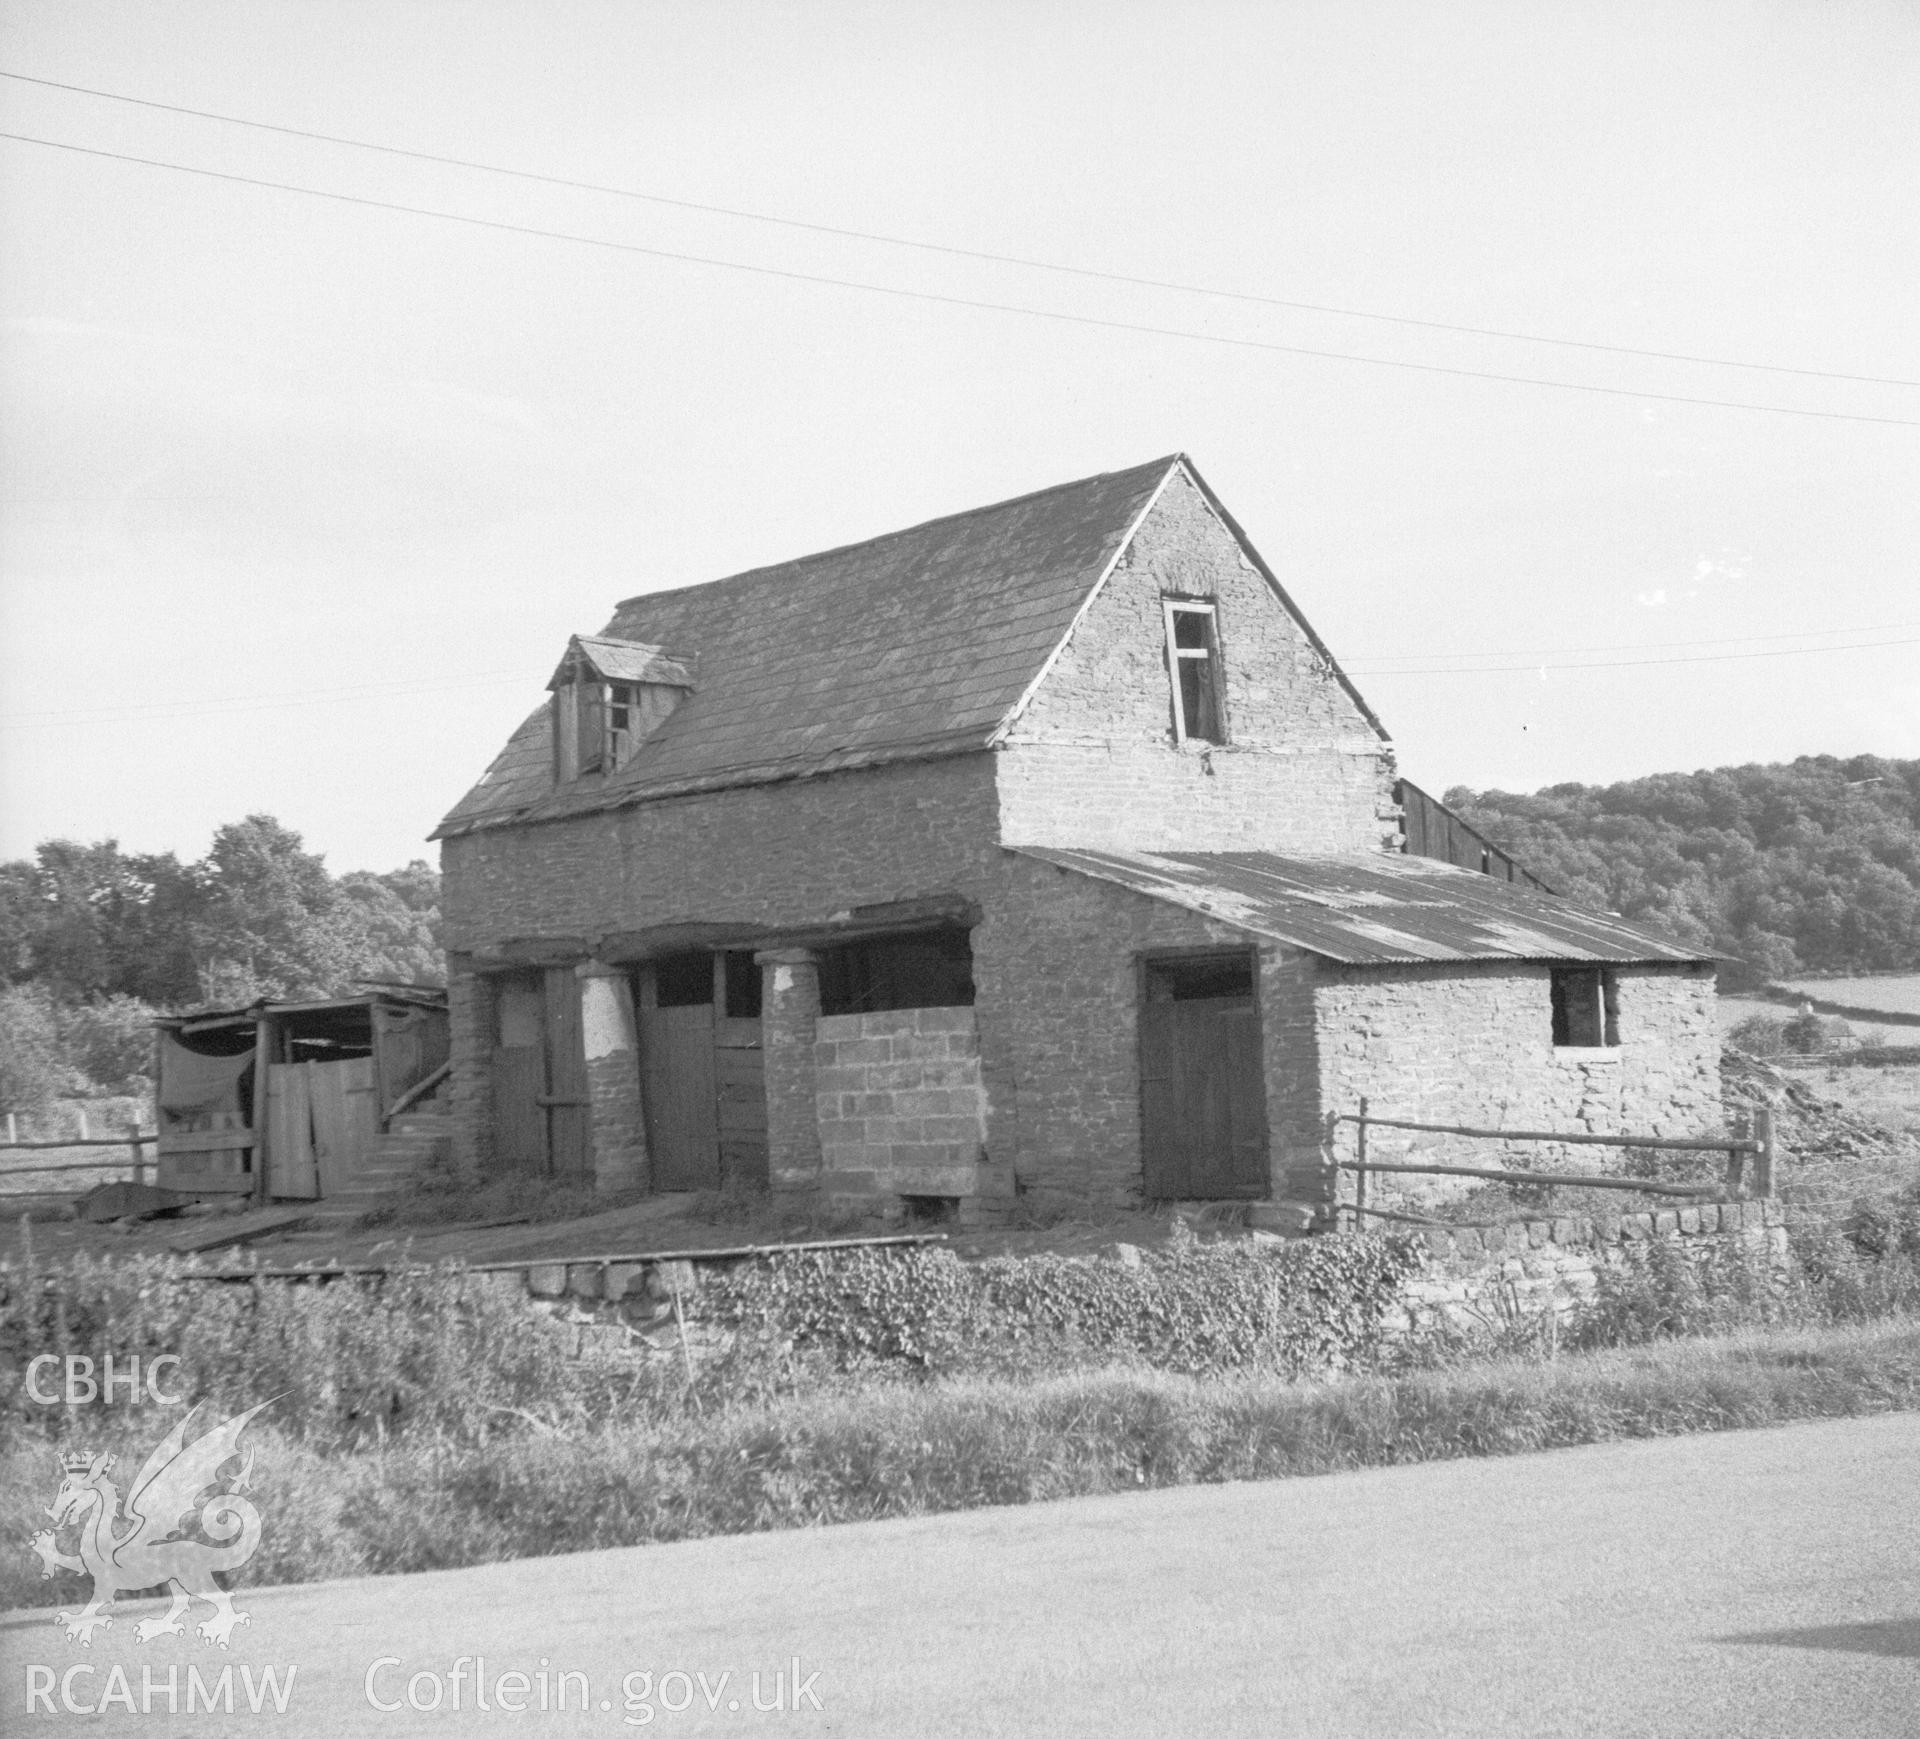 Digital copy of a black and white nitrate negative, exterior view of house in Monmouth.